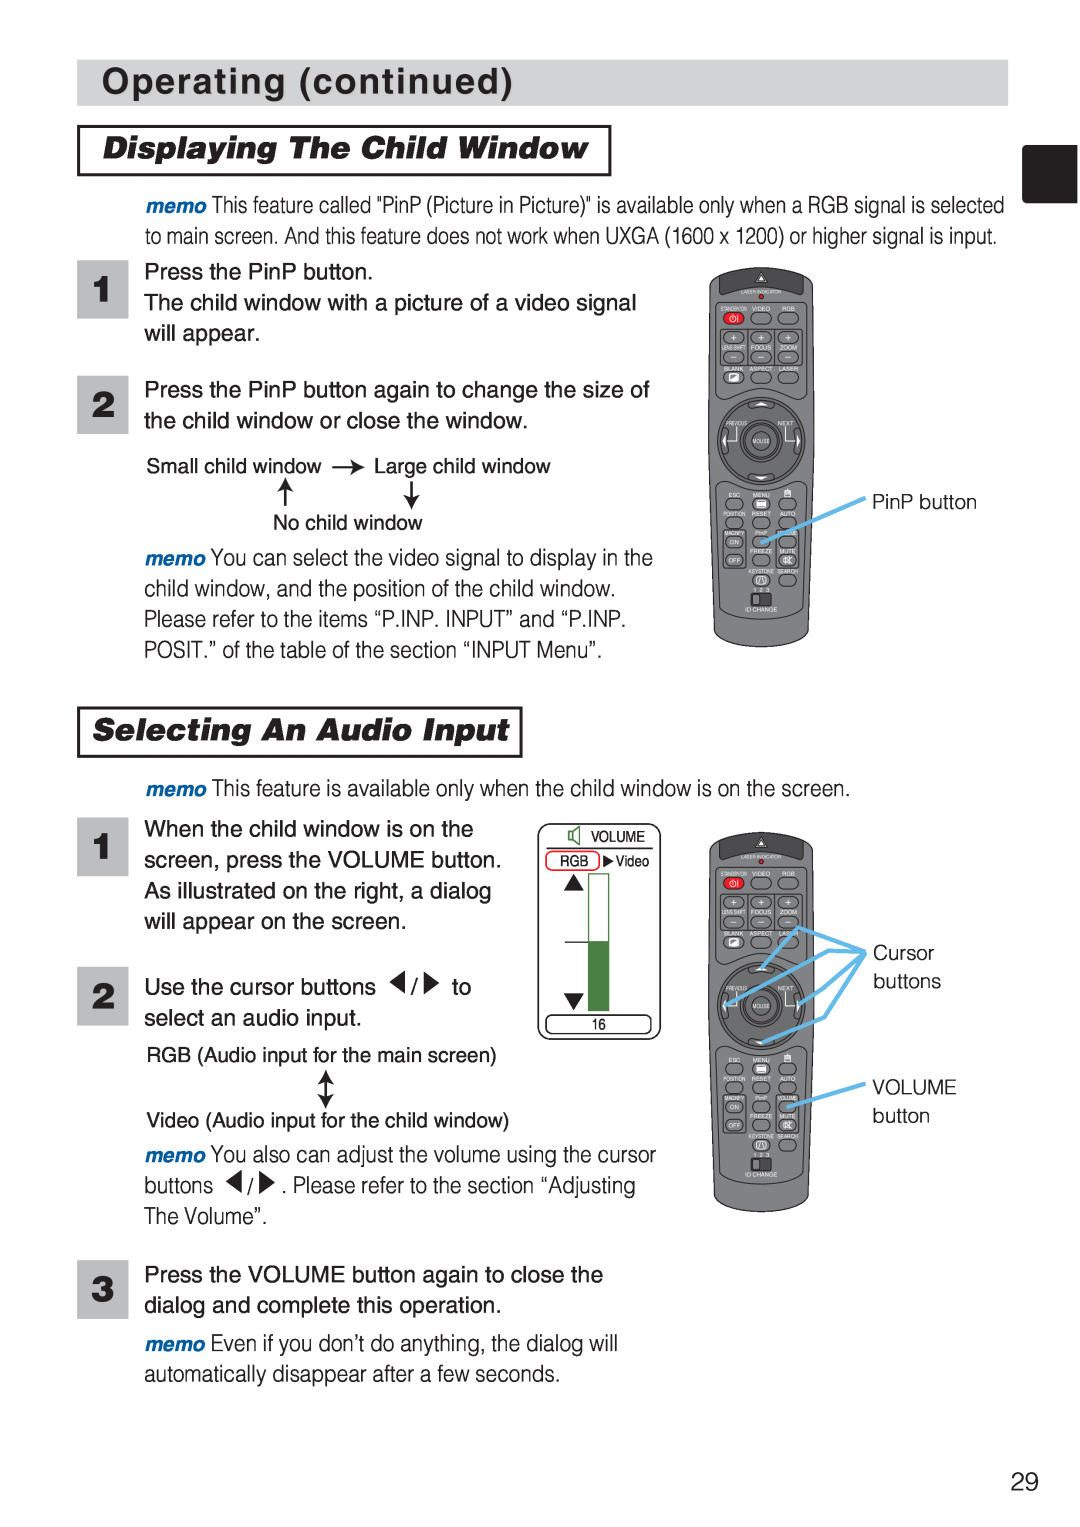 Toshiba TLP-SX3500 user manual Displaying The Child Window, Selecting An Audio Input, Operating continued, Video 